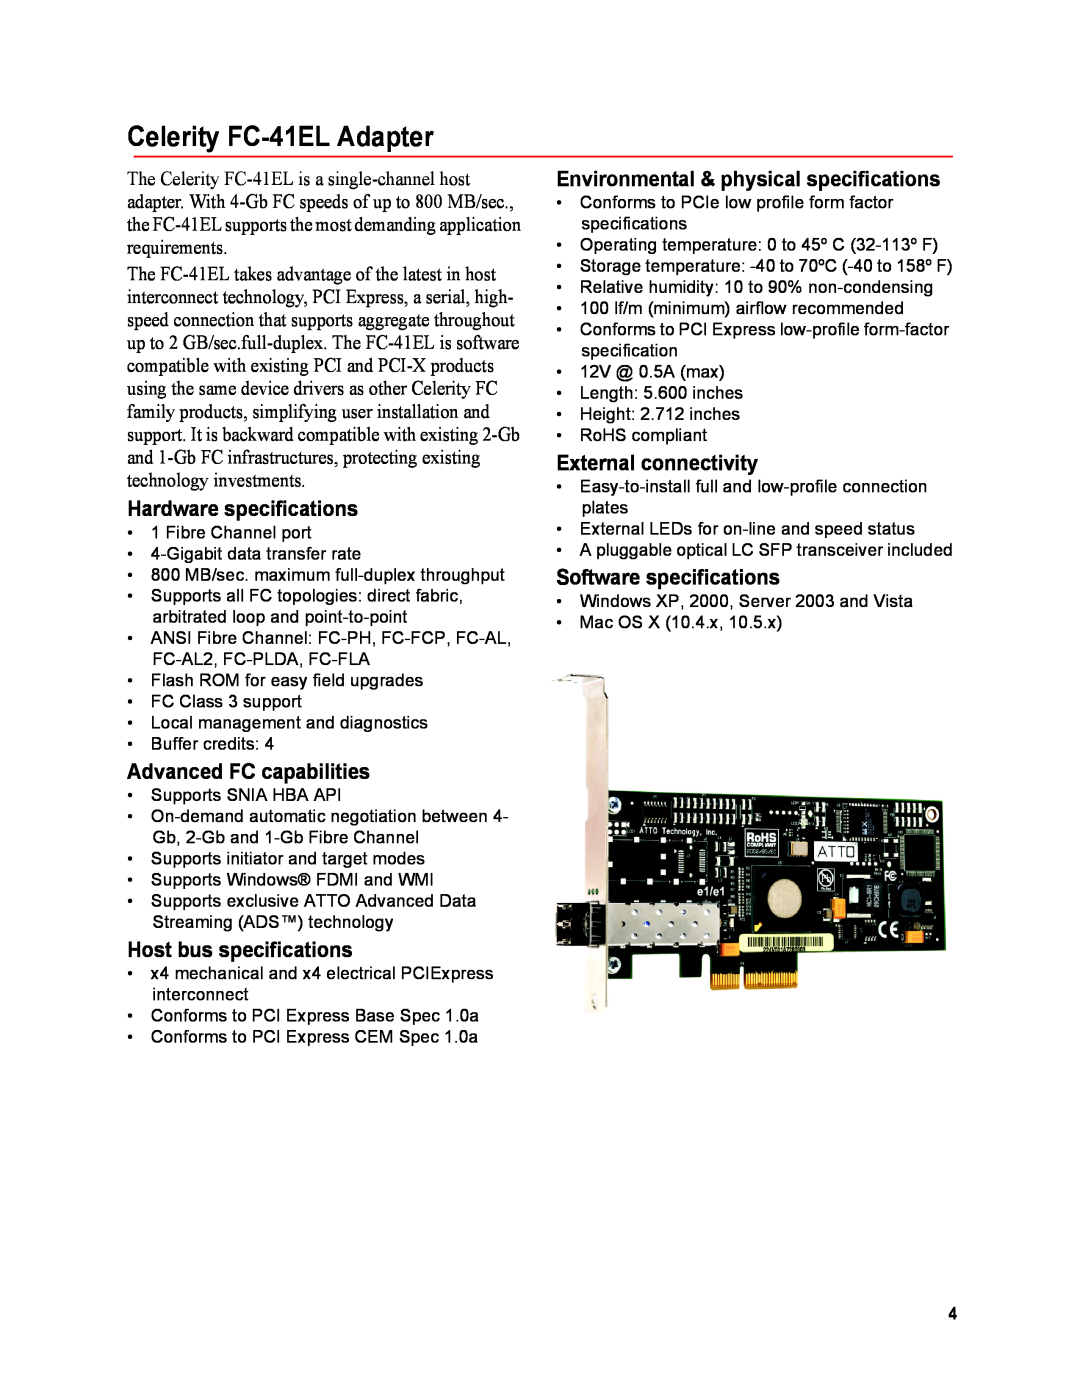 ATTO Technology FC-21PS Celerity FC-41EL Adapter, Hardware specifications, Advanced FC capabilities, External connectivity 